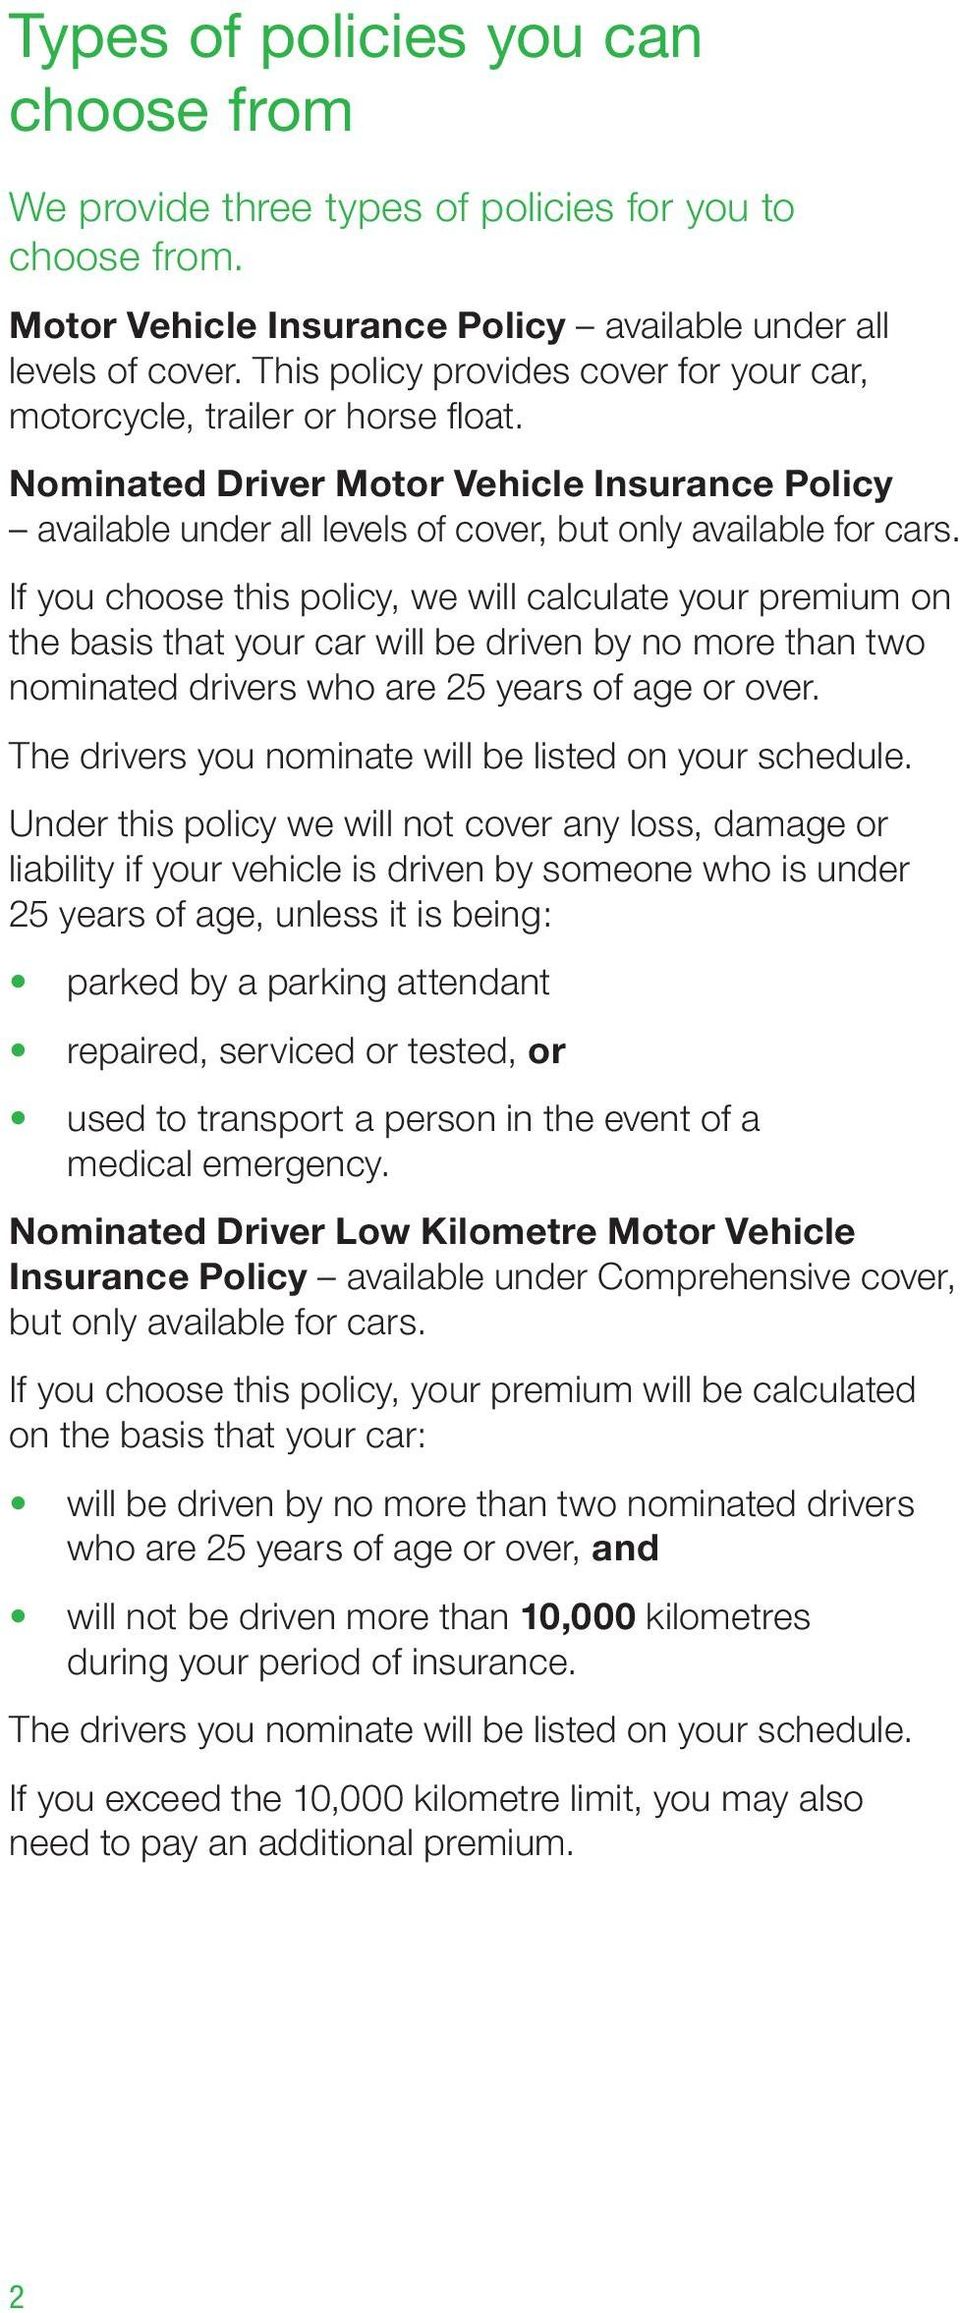 If you choose this policy, we will calculate your premium on the basis that your car will be driven by no more than two nominated drivers who are 25 years of age or over.